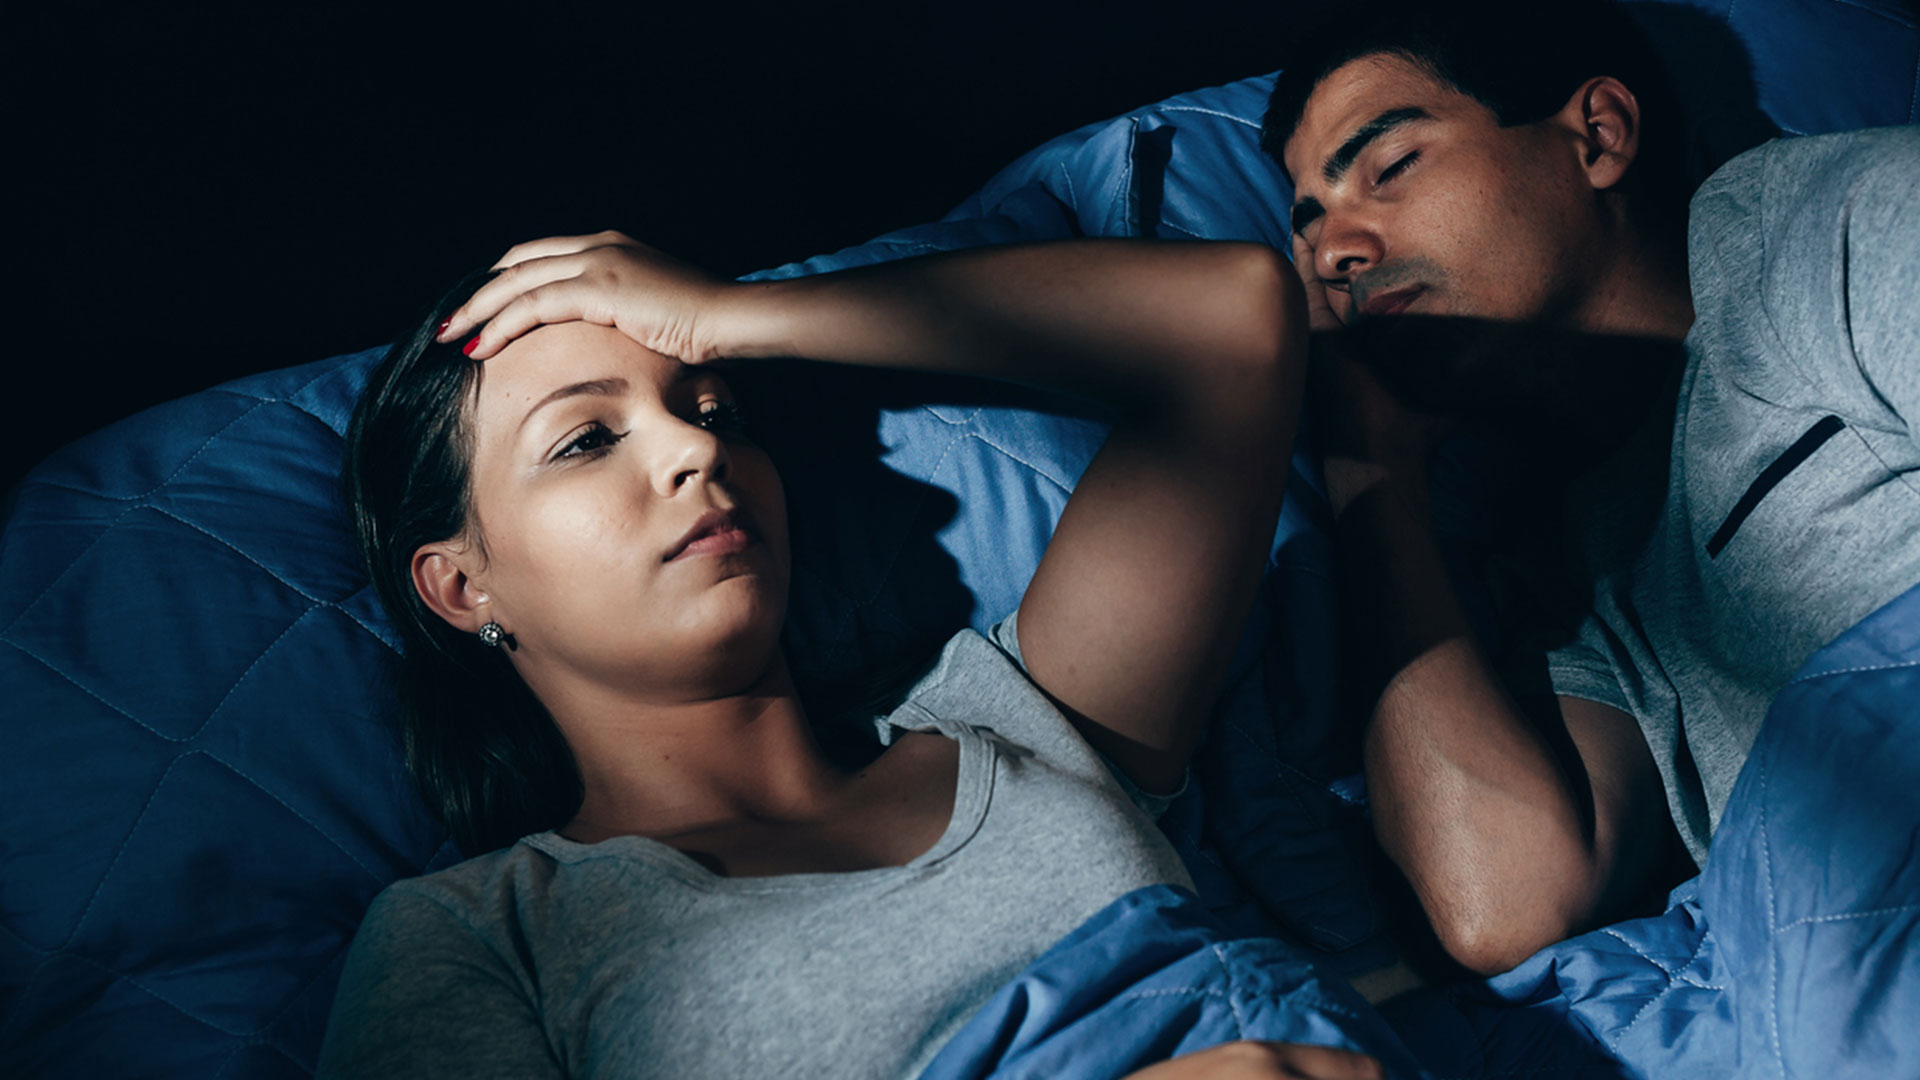 Is There a Link Between Insomnia and Sexual Dysfunction? A New Study Has Surprising Answers